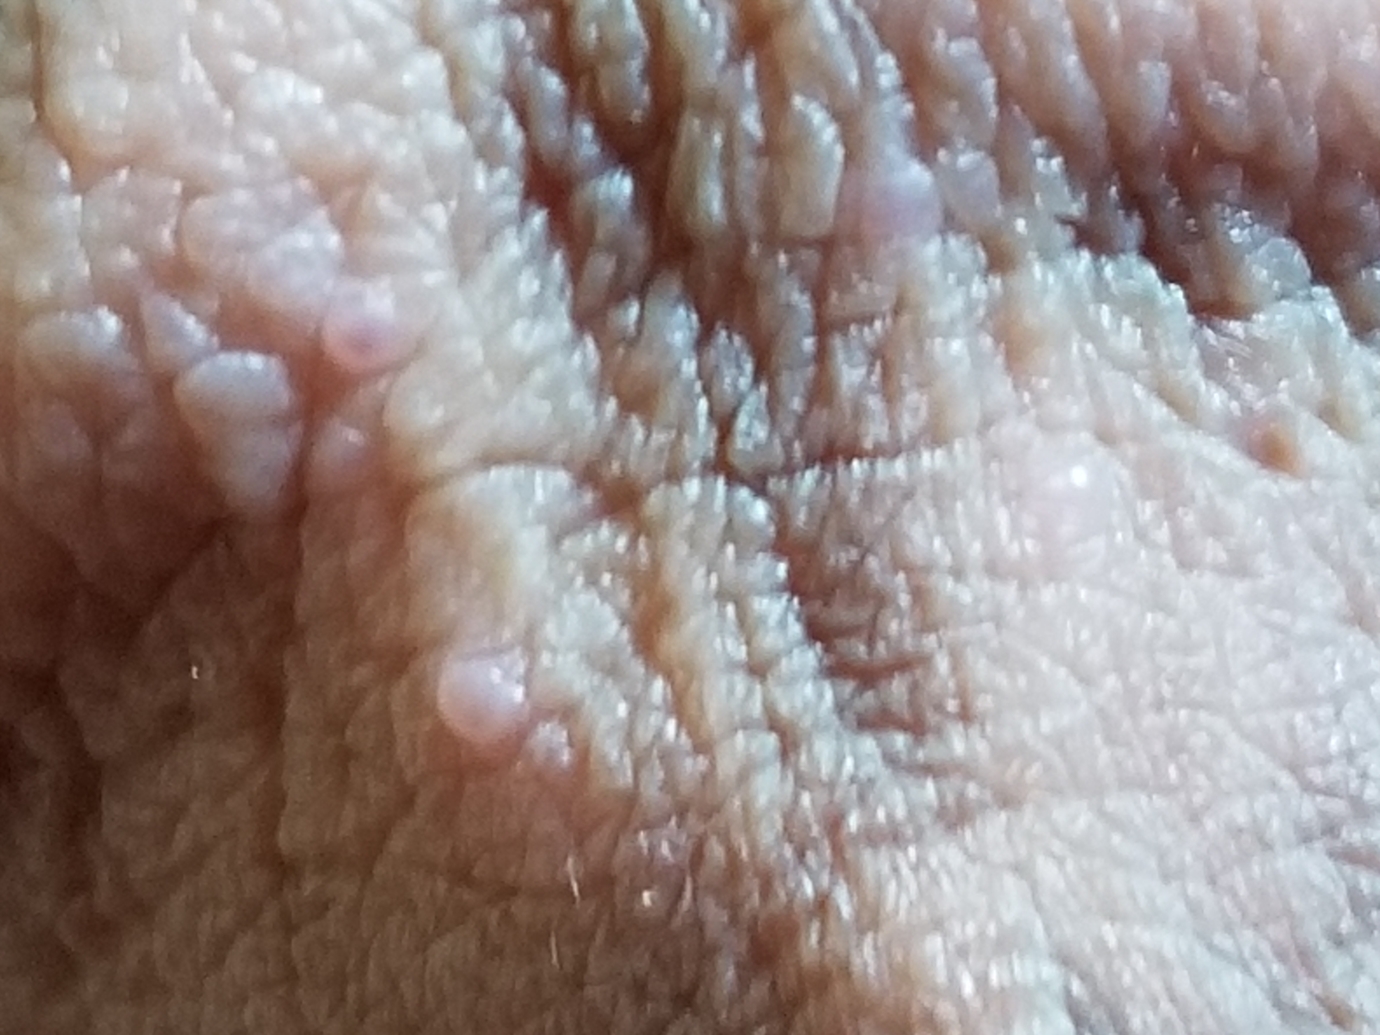 Head penile pimples on Causes of